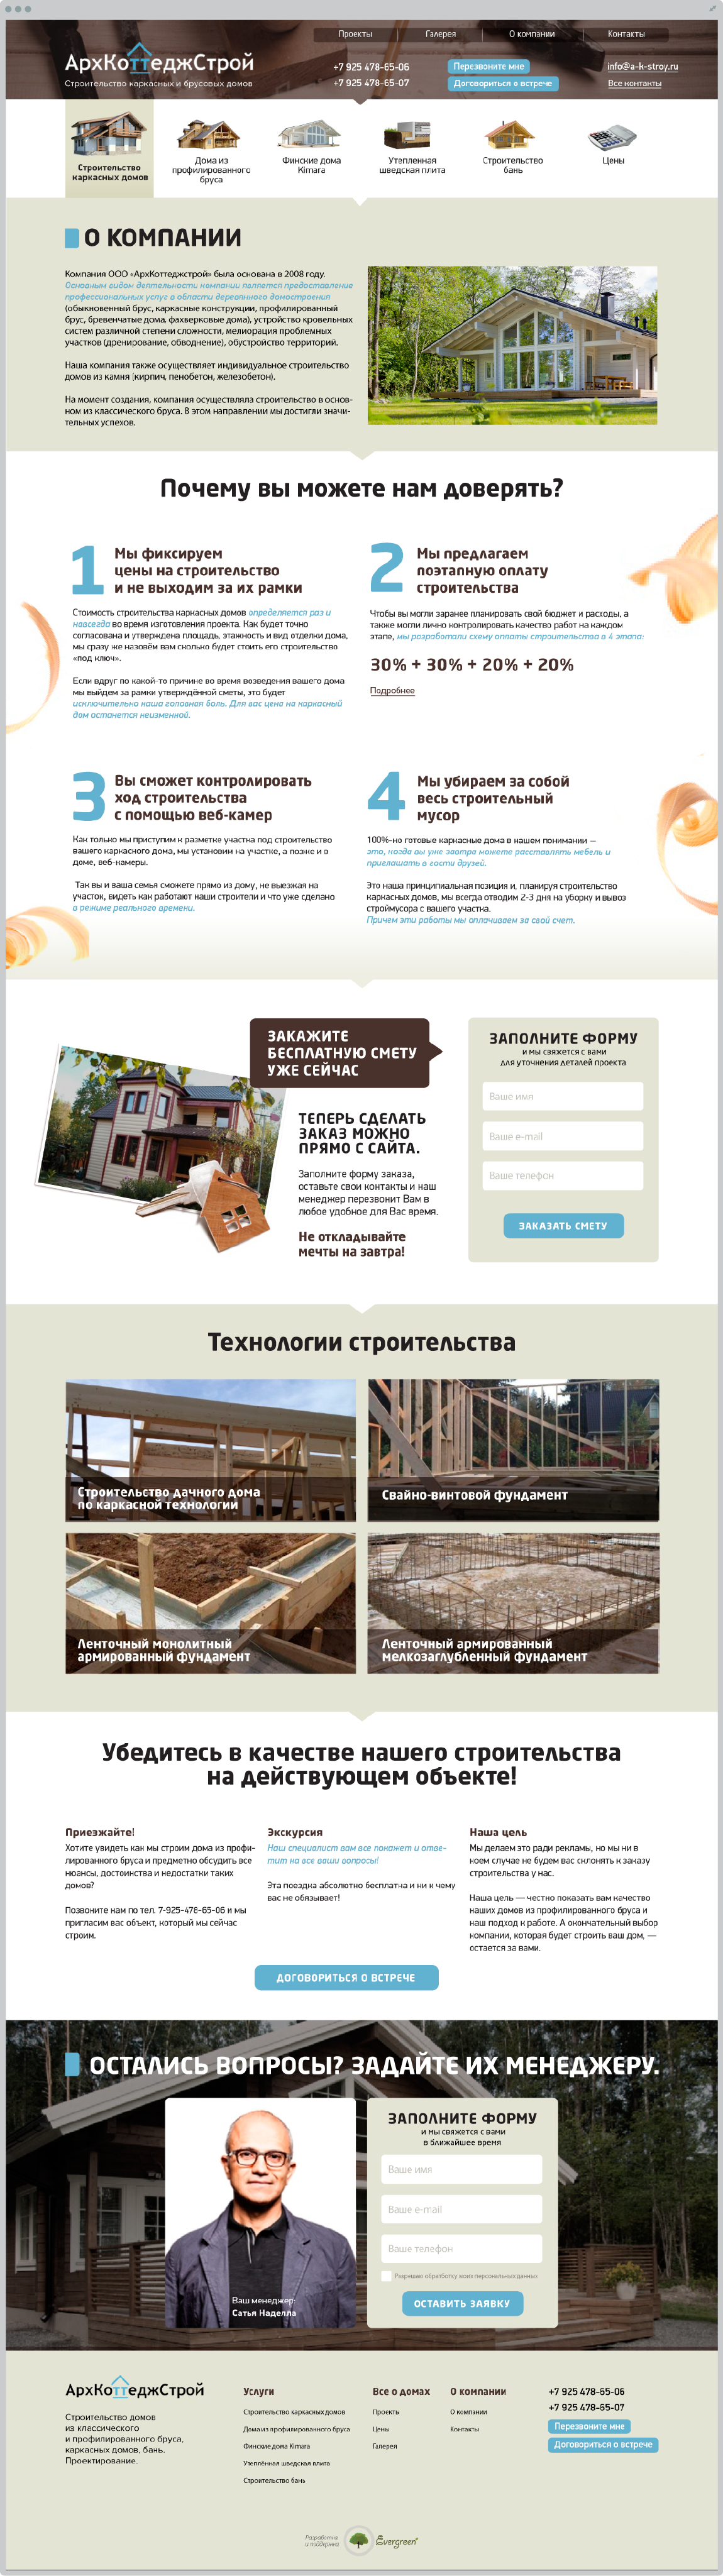 The site for the construction of wooden houses | Evergreen projects 12